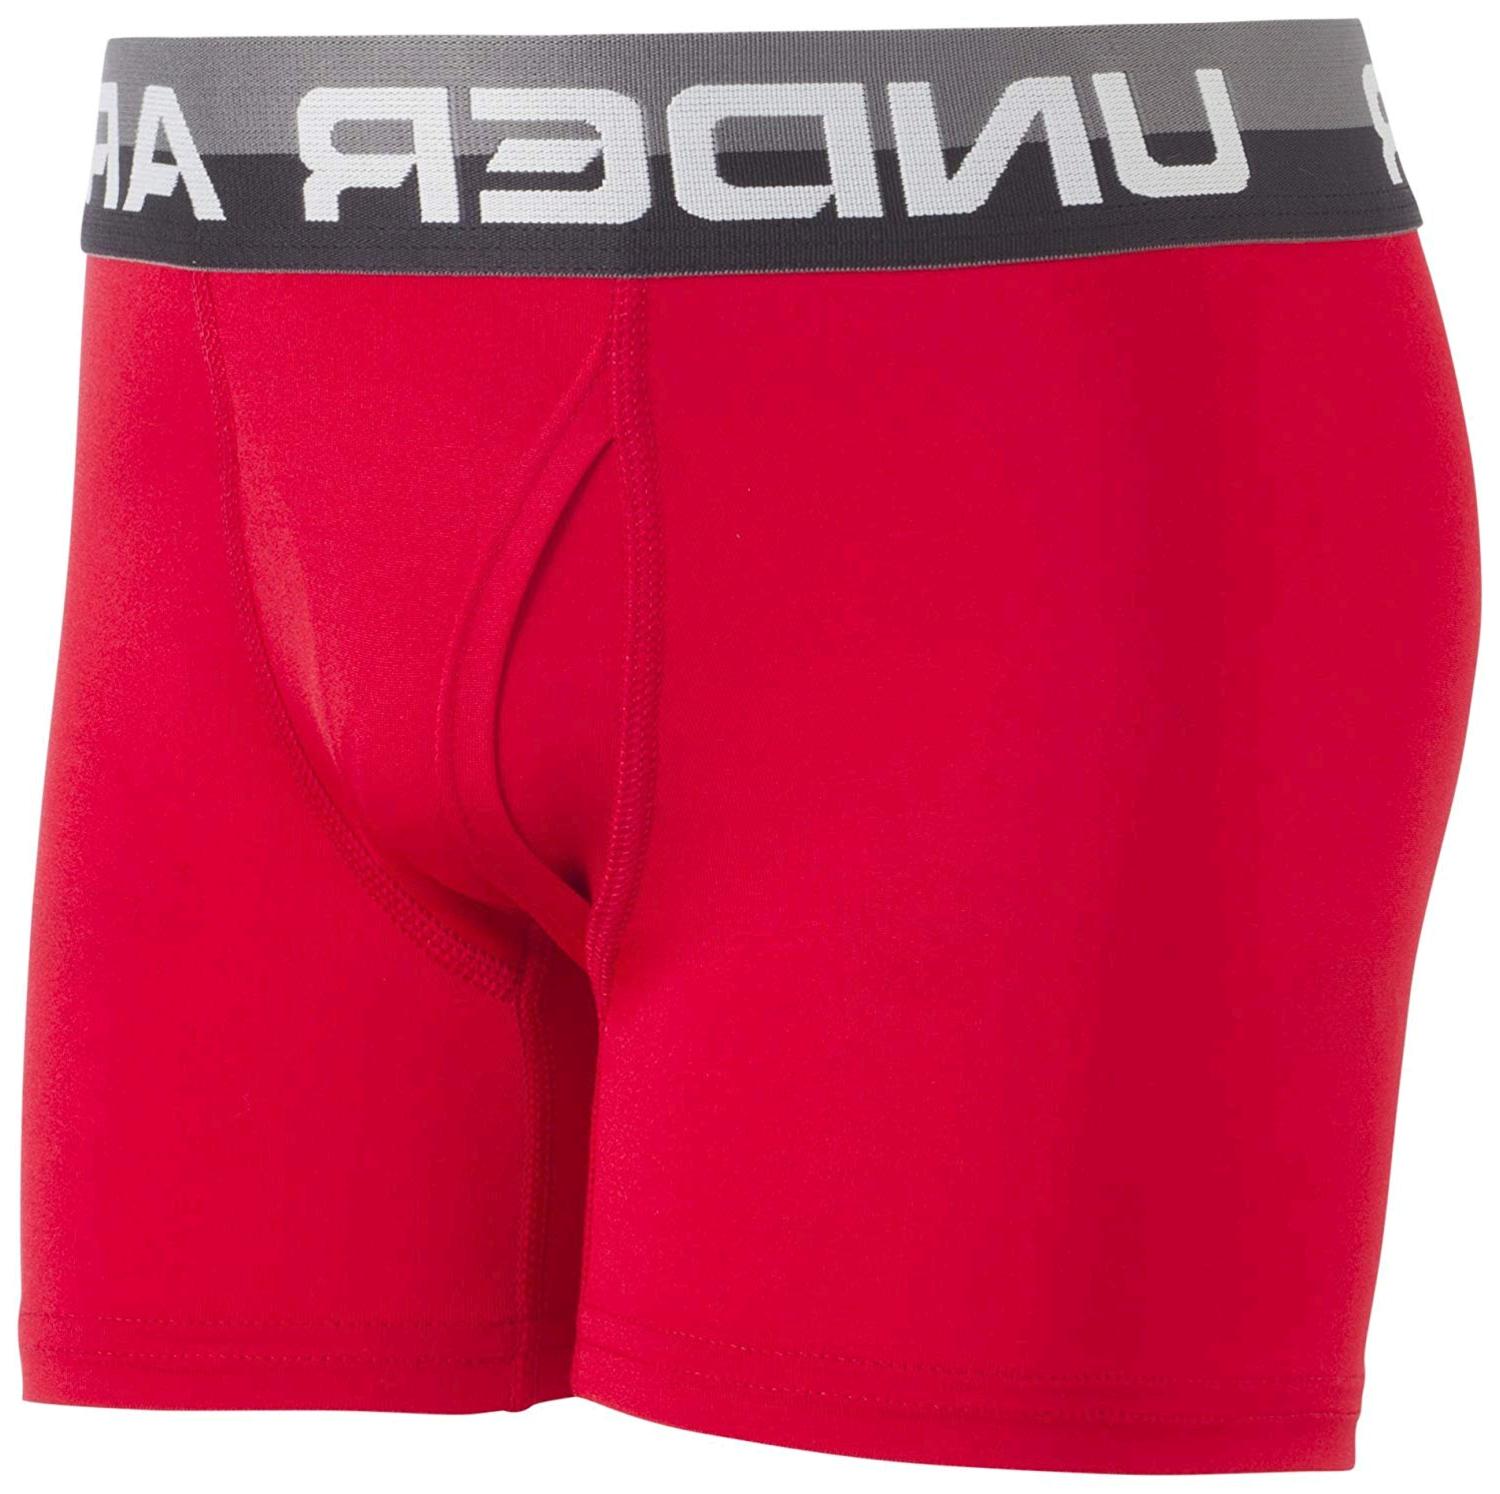 Under Armour Boys' Big 2 Pack Performance Boxer, Red/Black, Size Youth ...